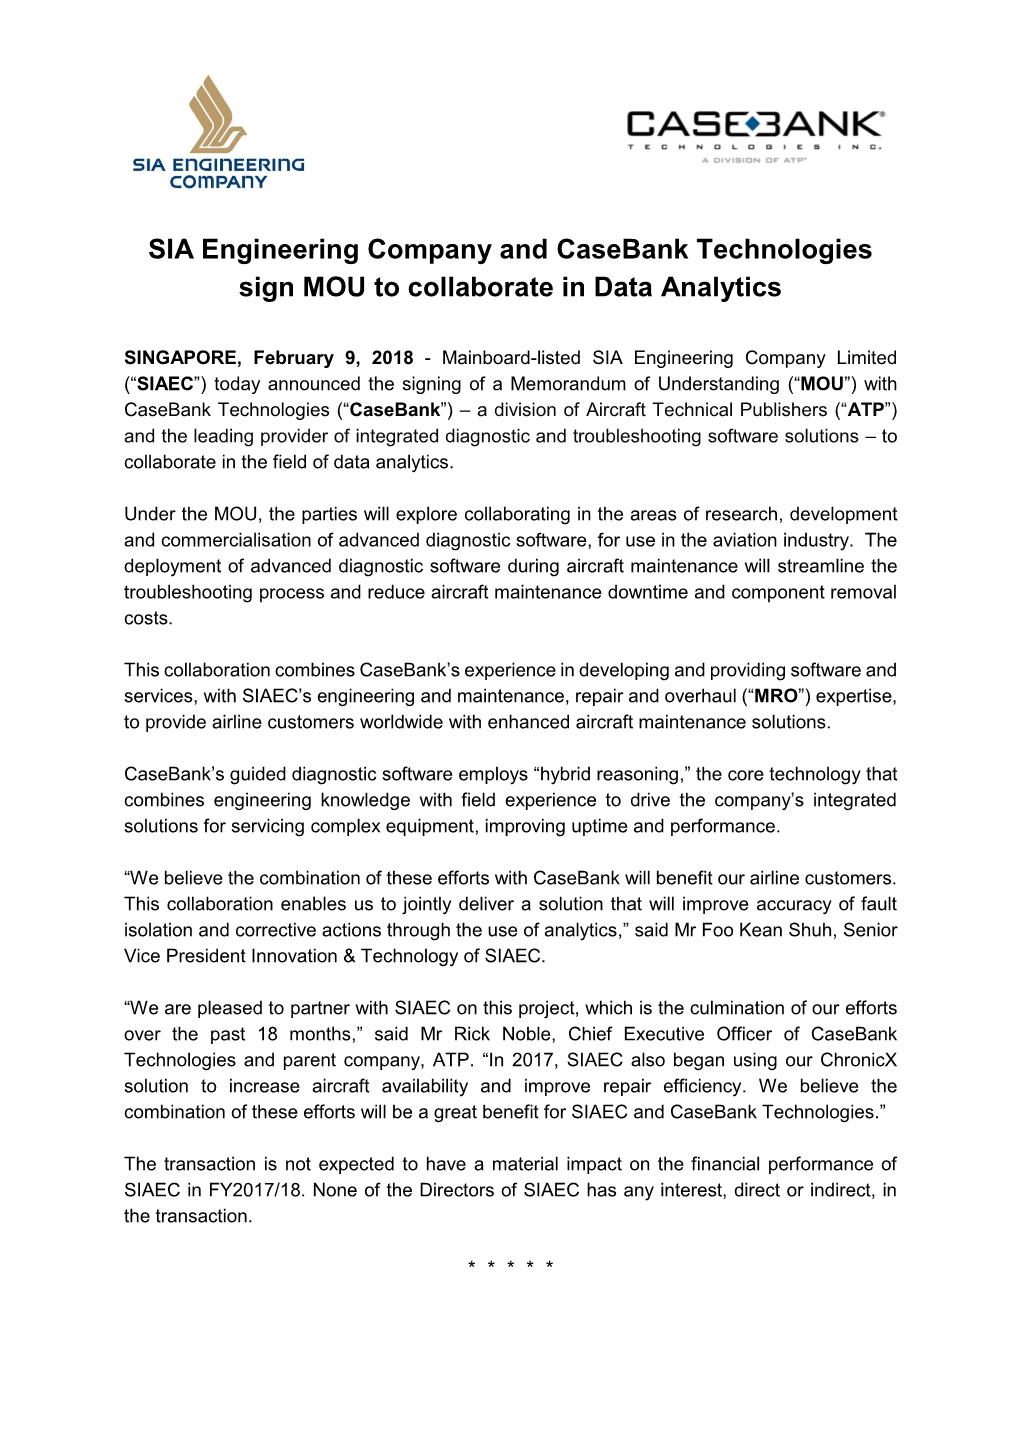 SIA Engineering Company and Casebank Technologies Sign MOU to Collaborate in Data Analytics